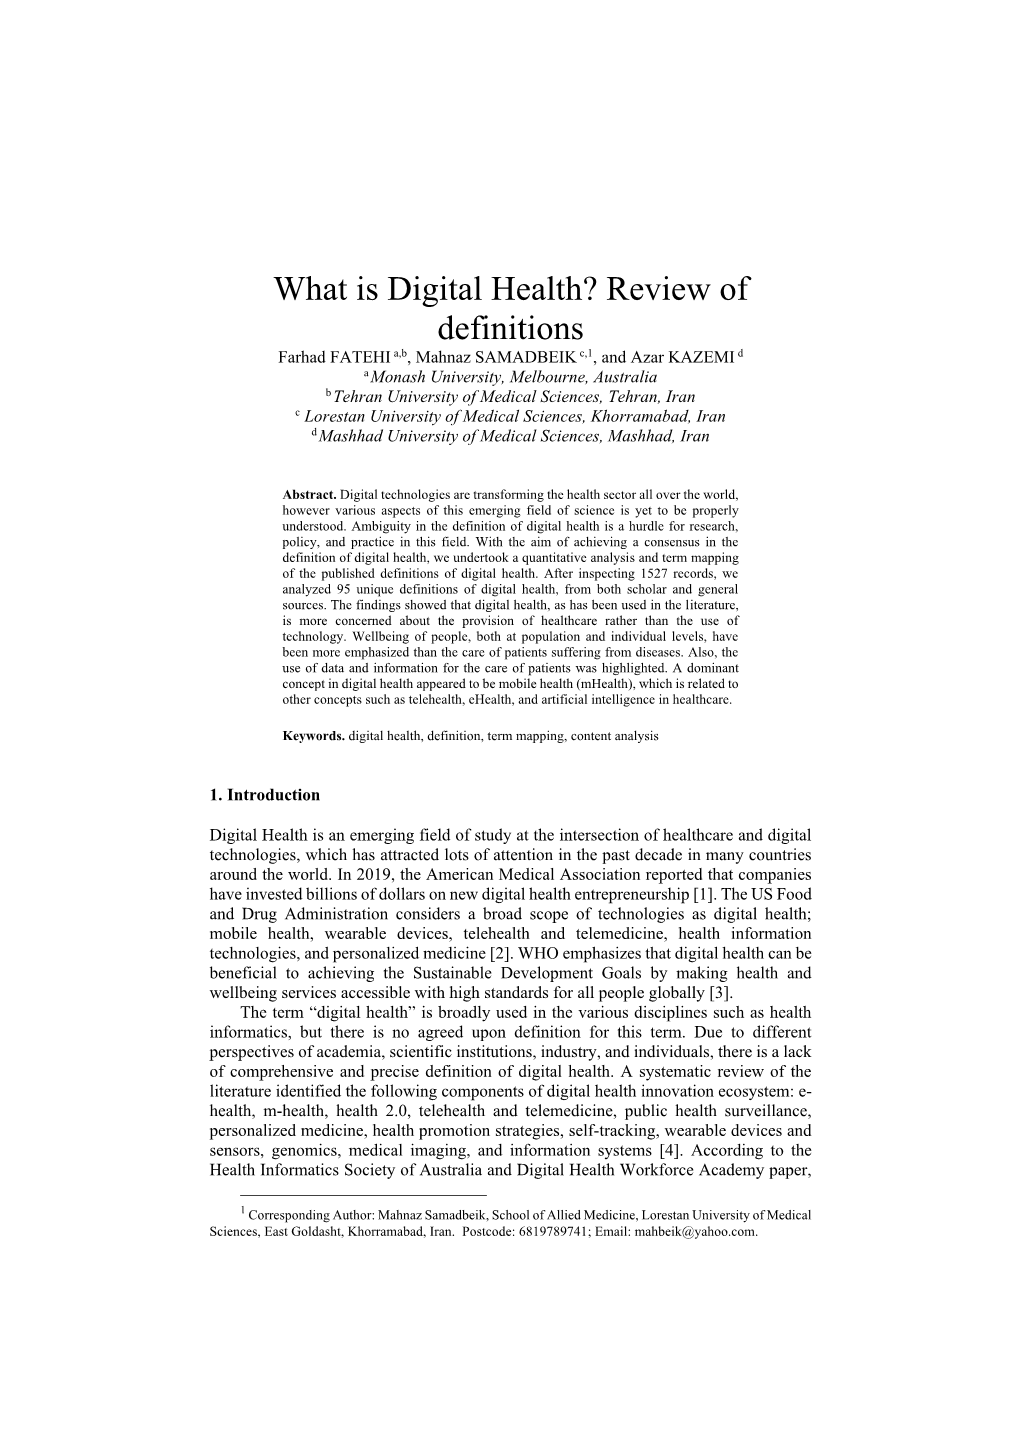 What Is Digital Health? Review of Definitions